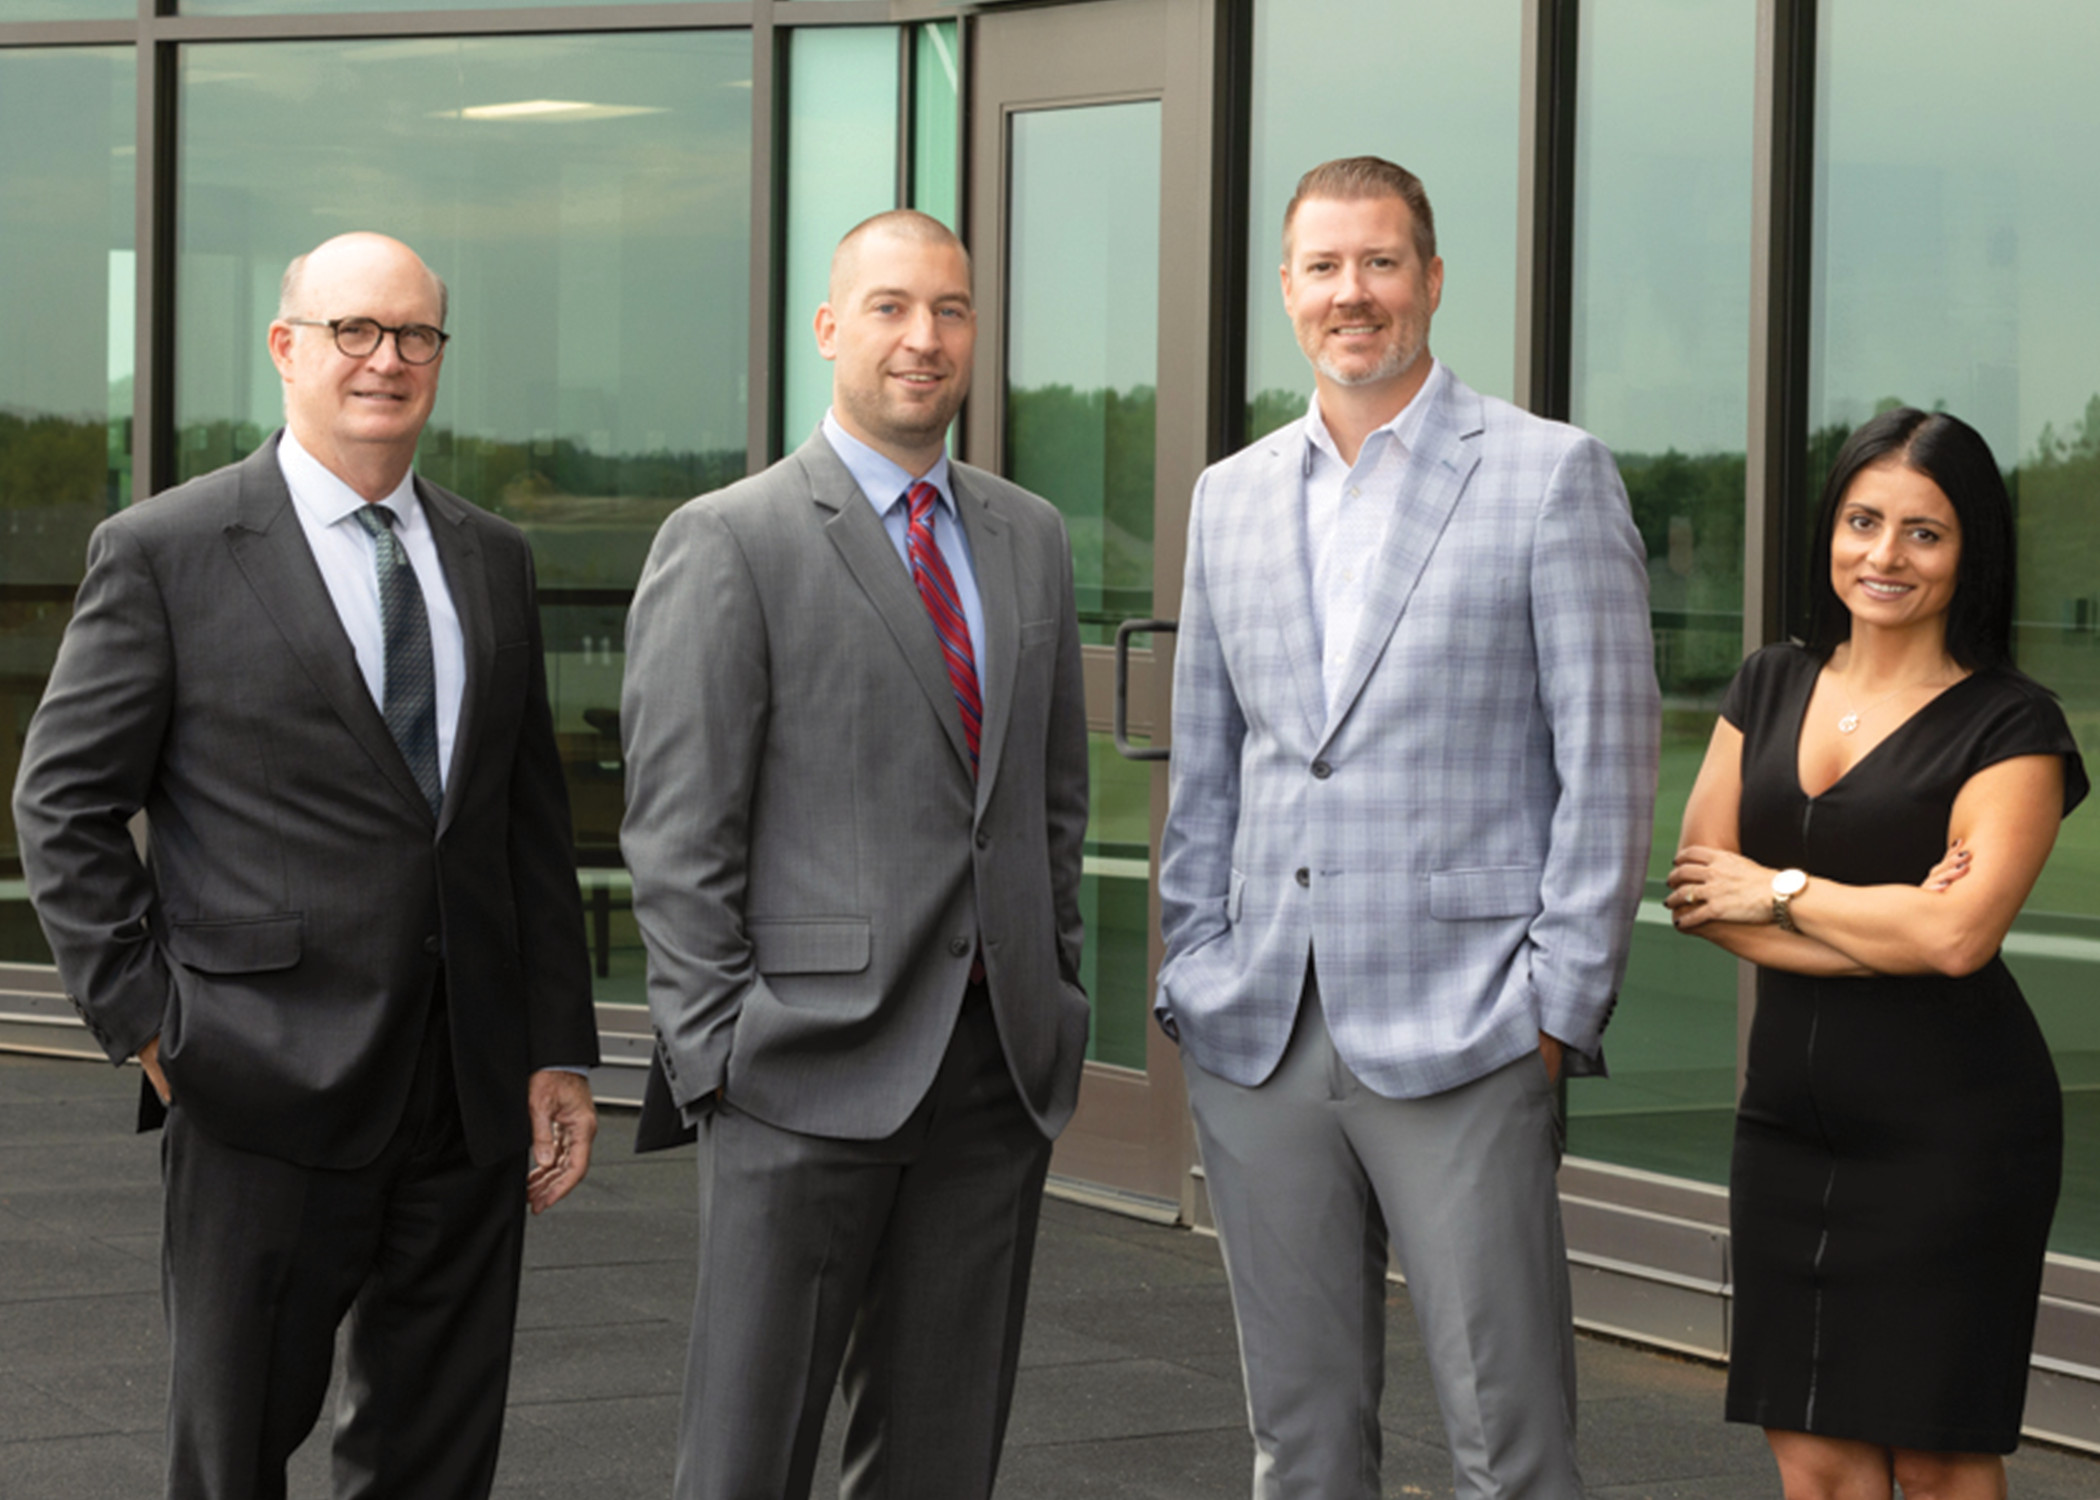 The Schindler Wealth Management Group